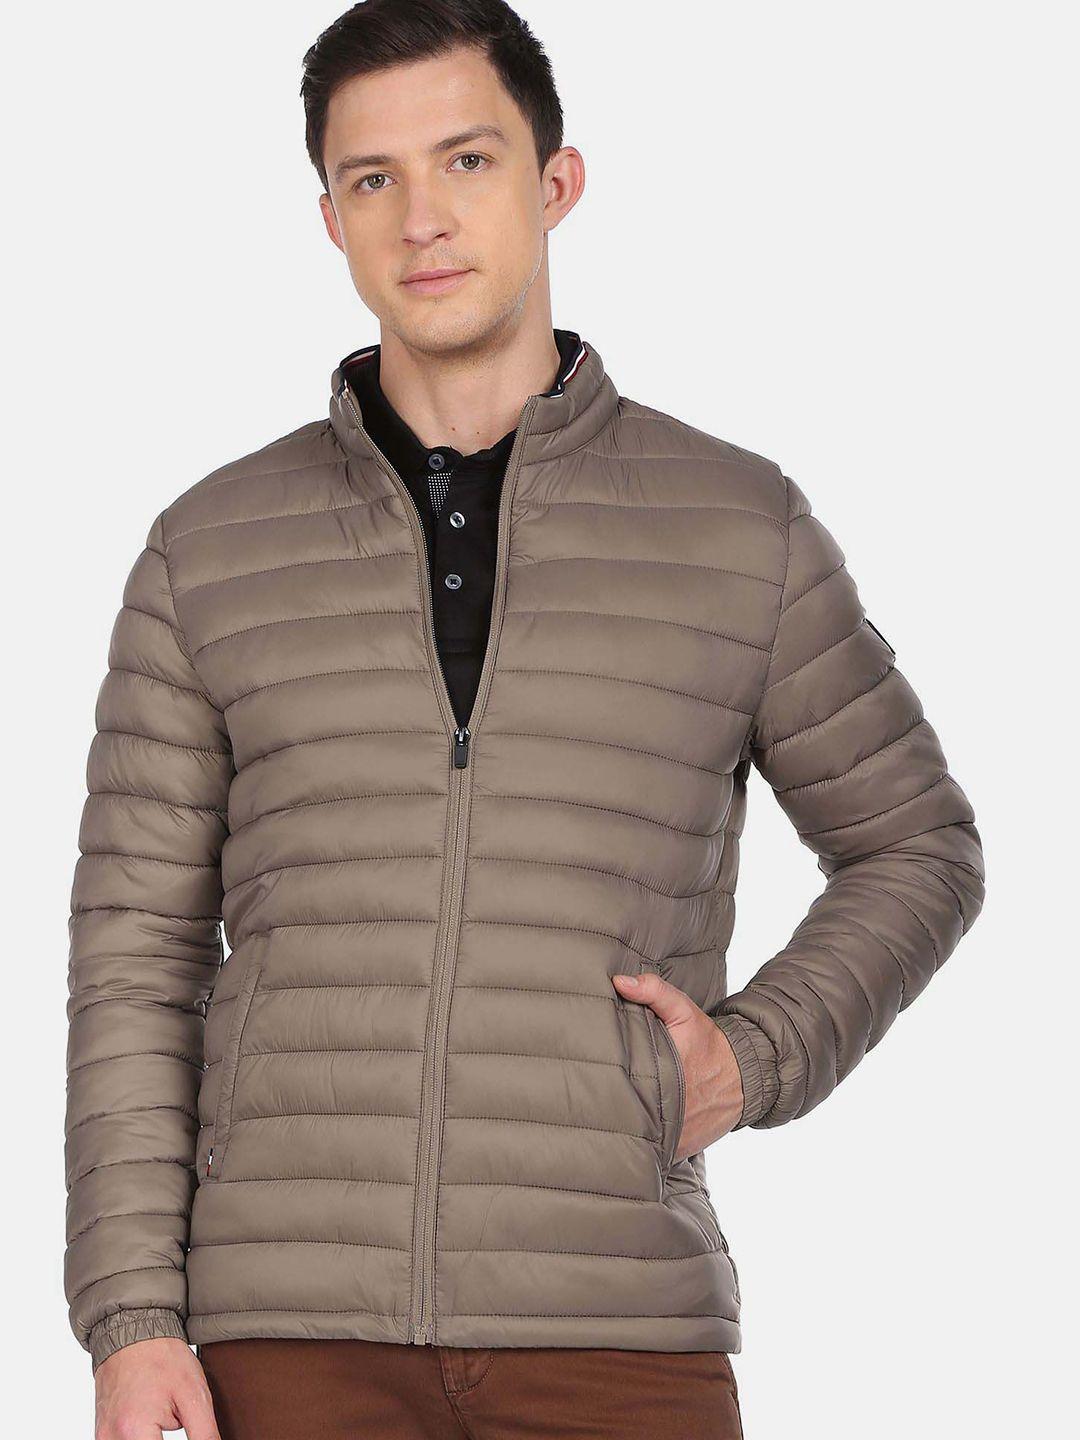 arrow-sport-men-brown-striped-quilted-puffer-jacket